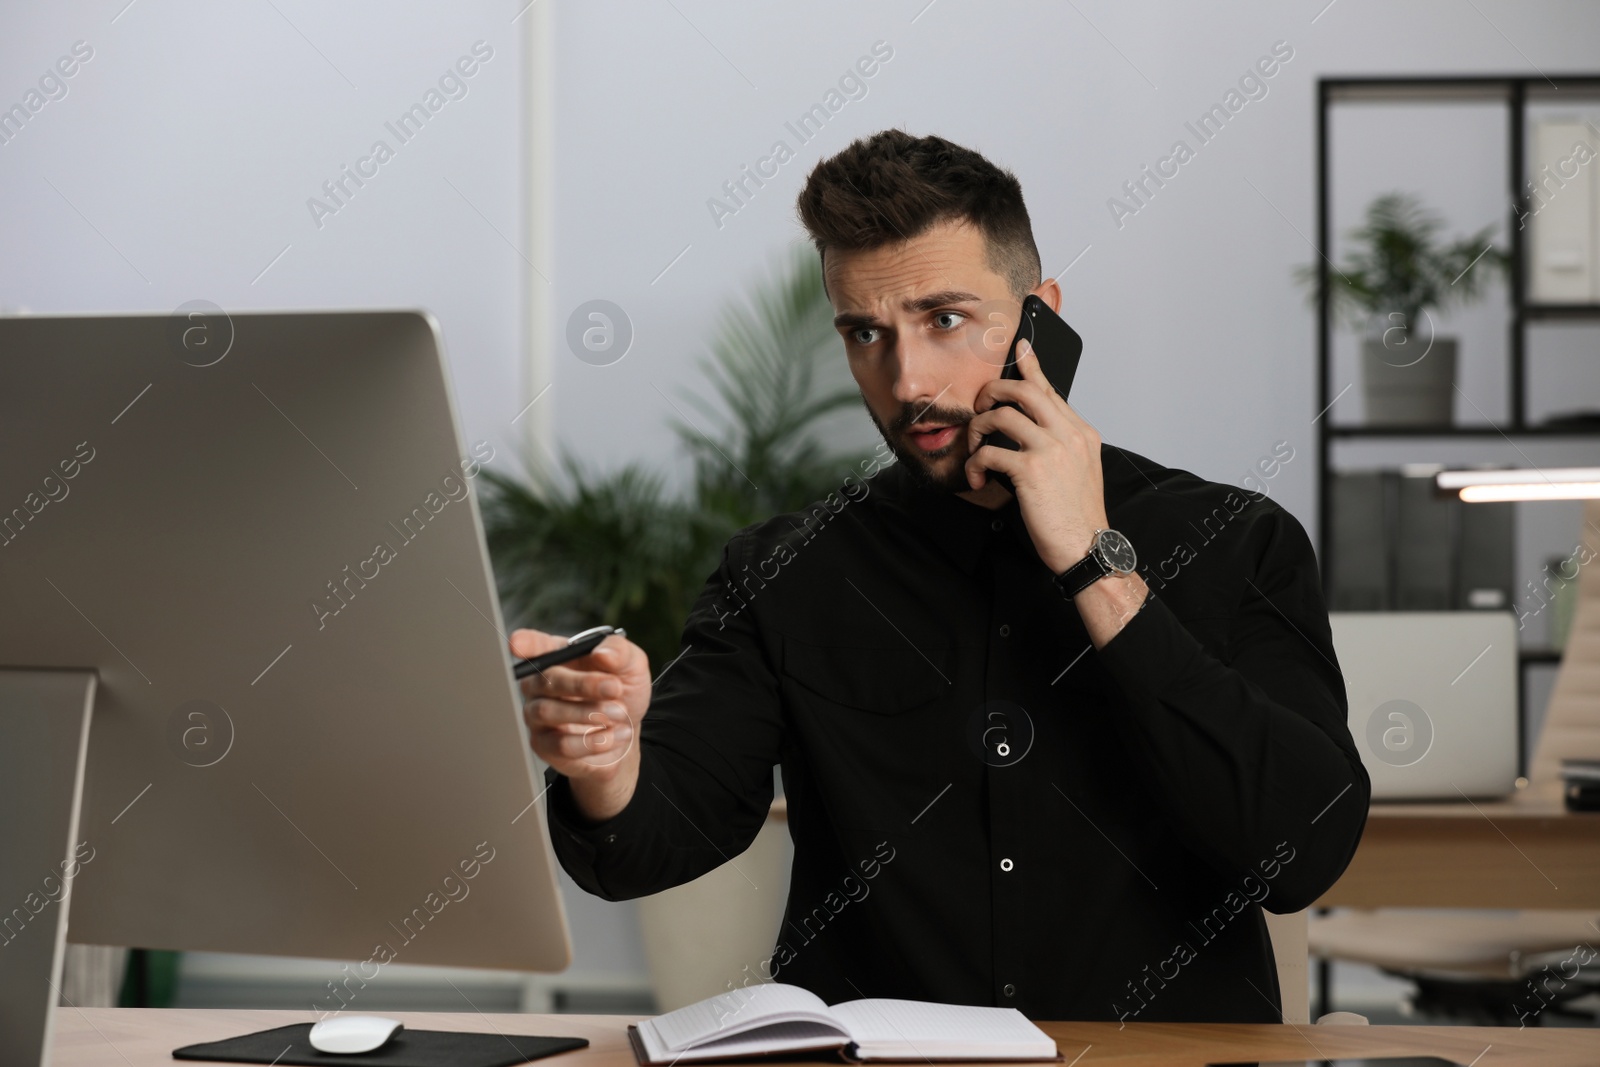 Photo of Man talking on phone while working with computer at table in office